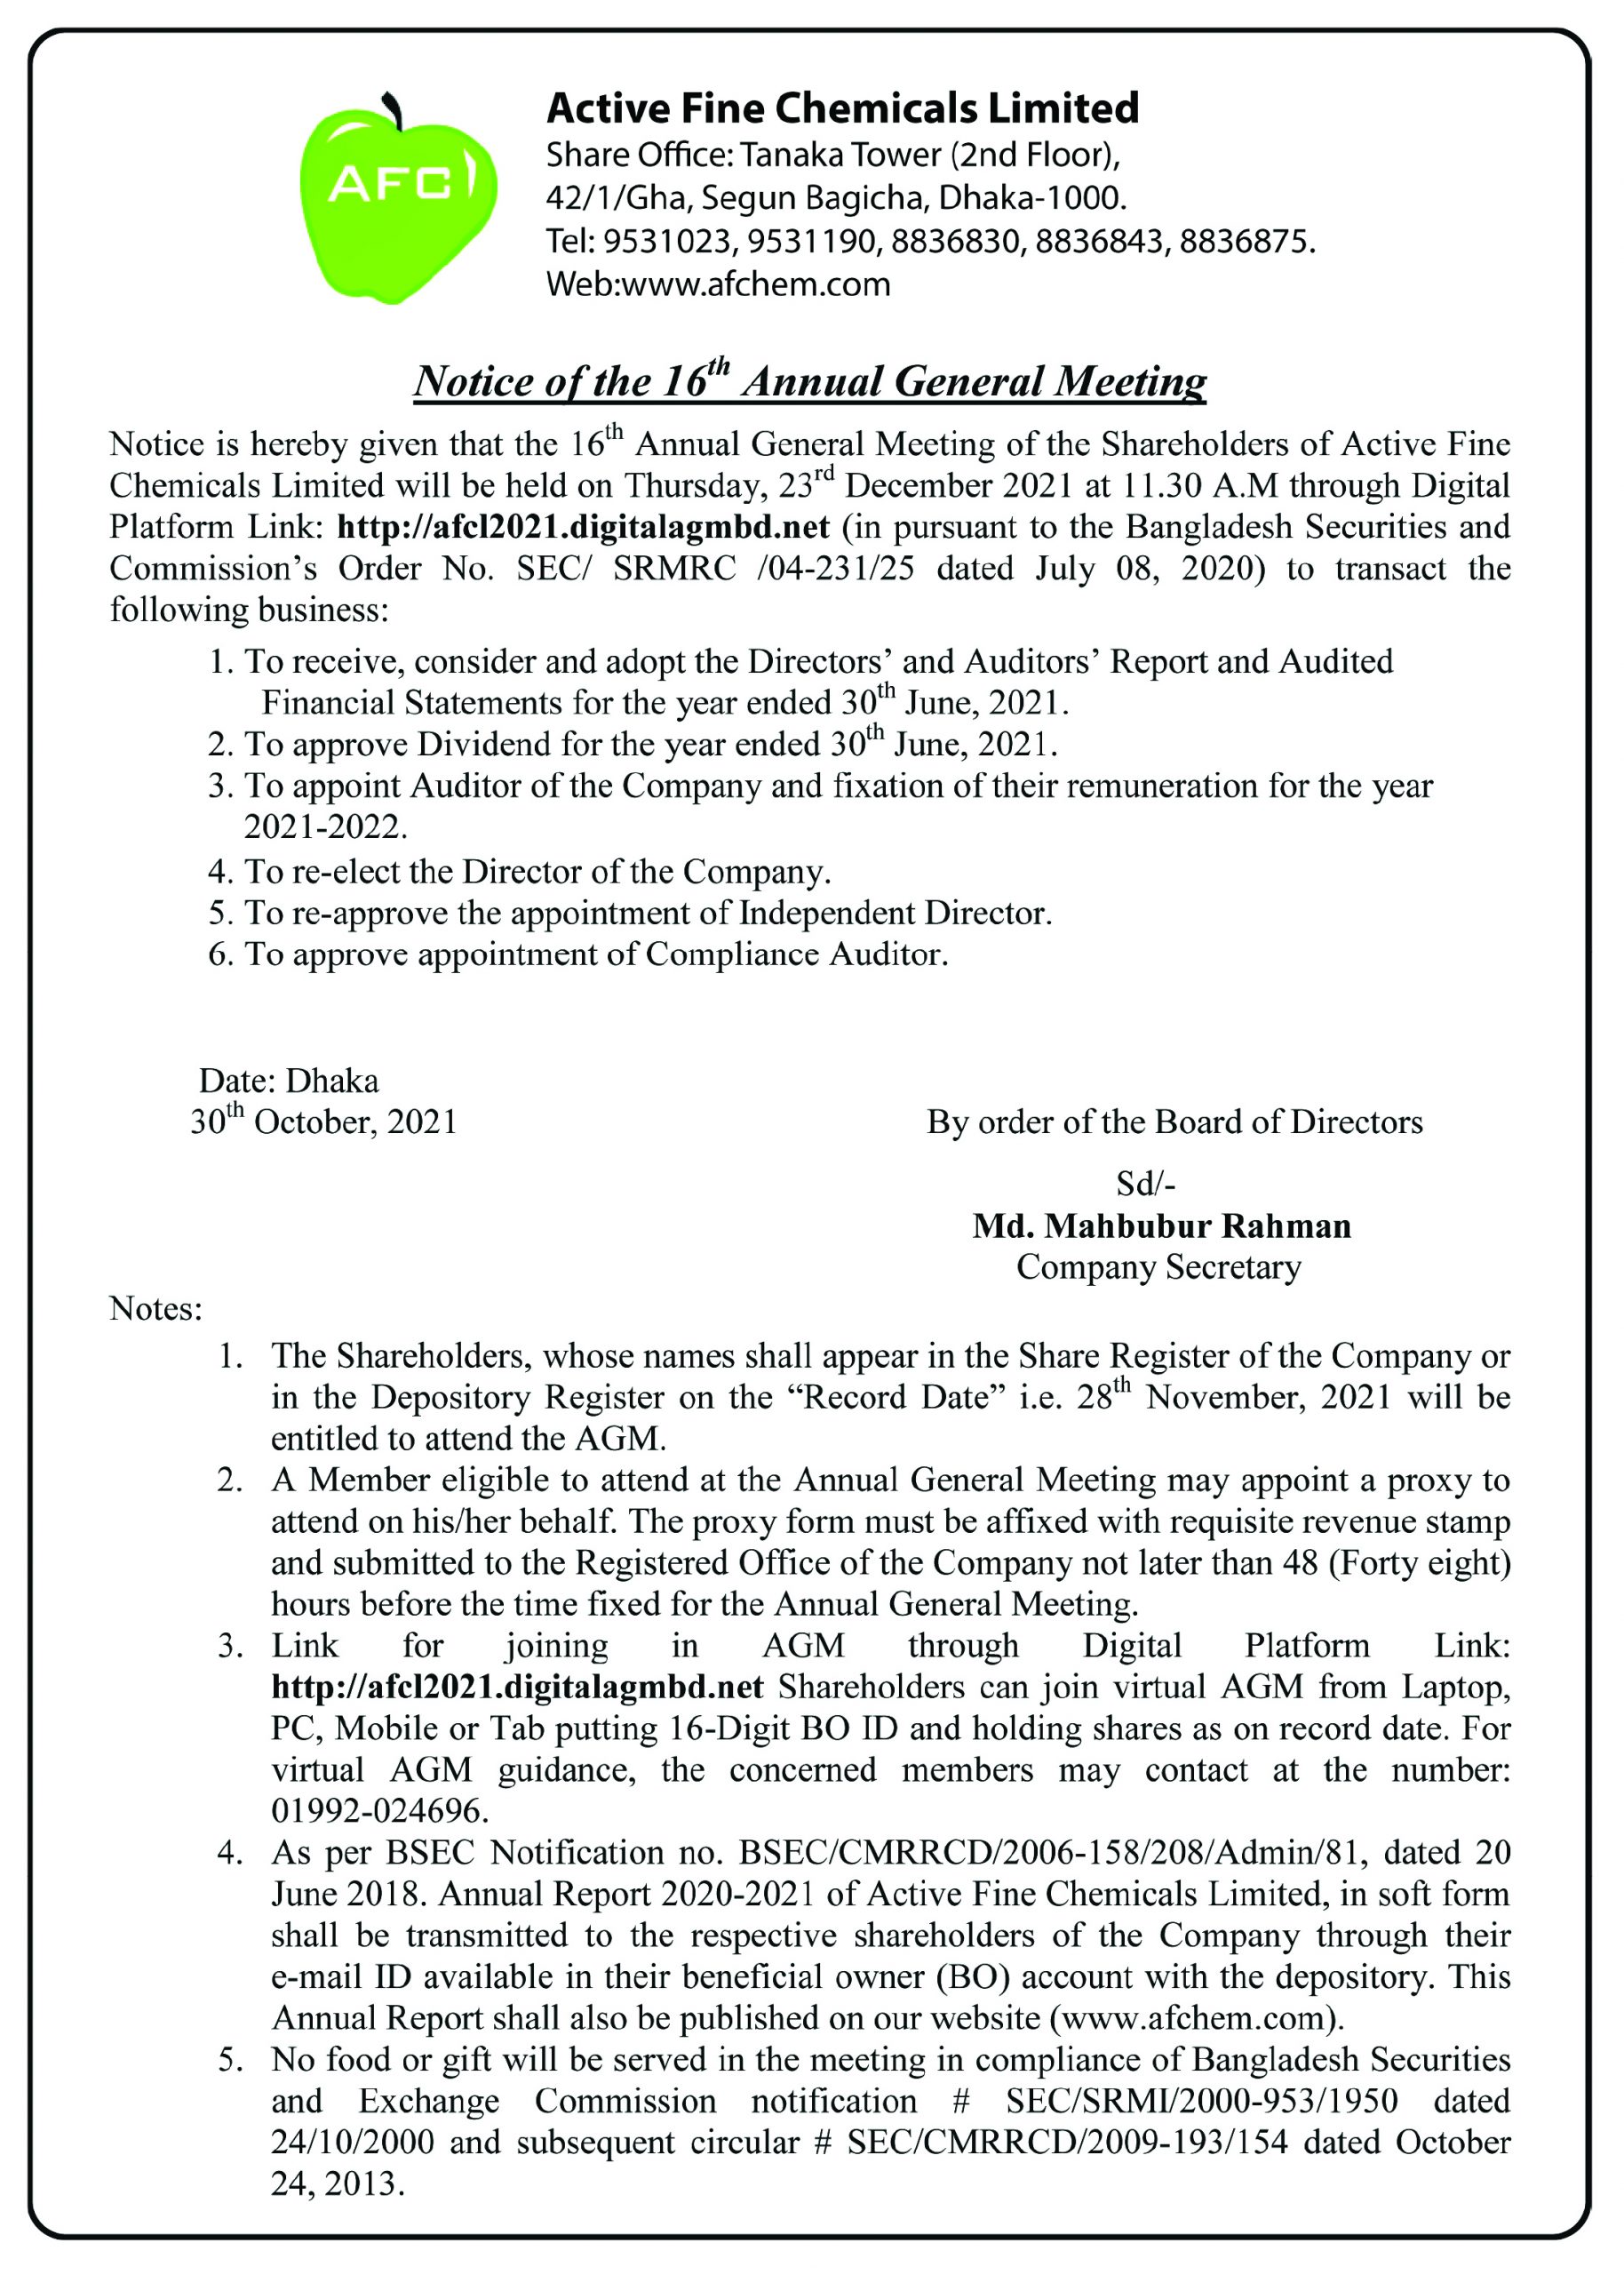 Notice of The 16th Annual General Meeting on Active Fine Chemicals Limited 
